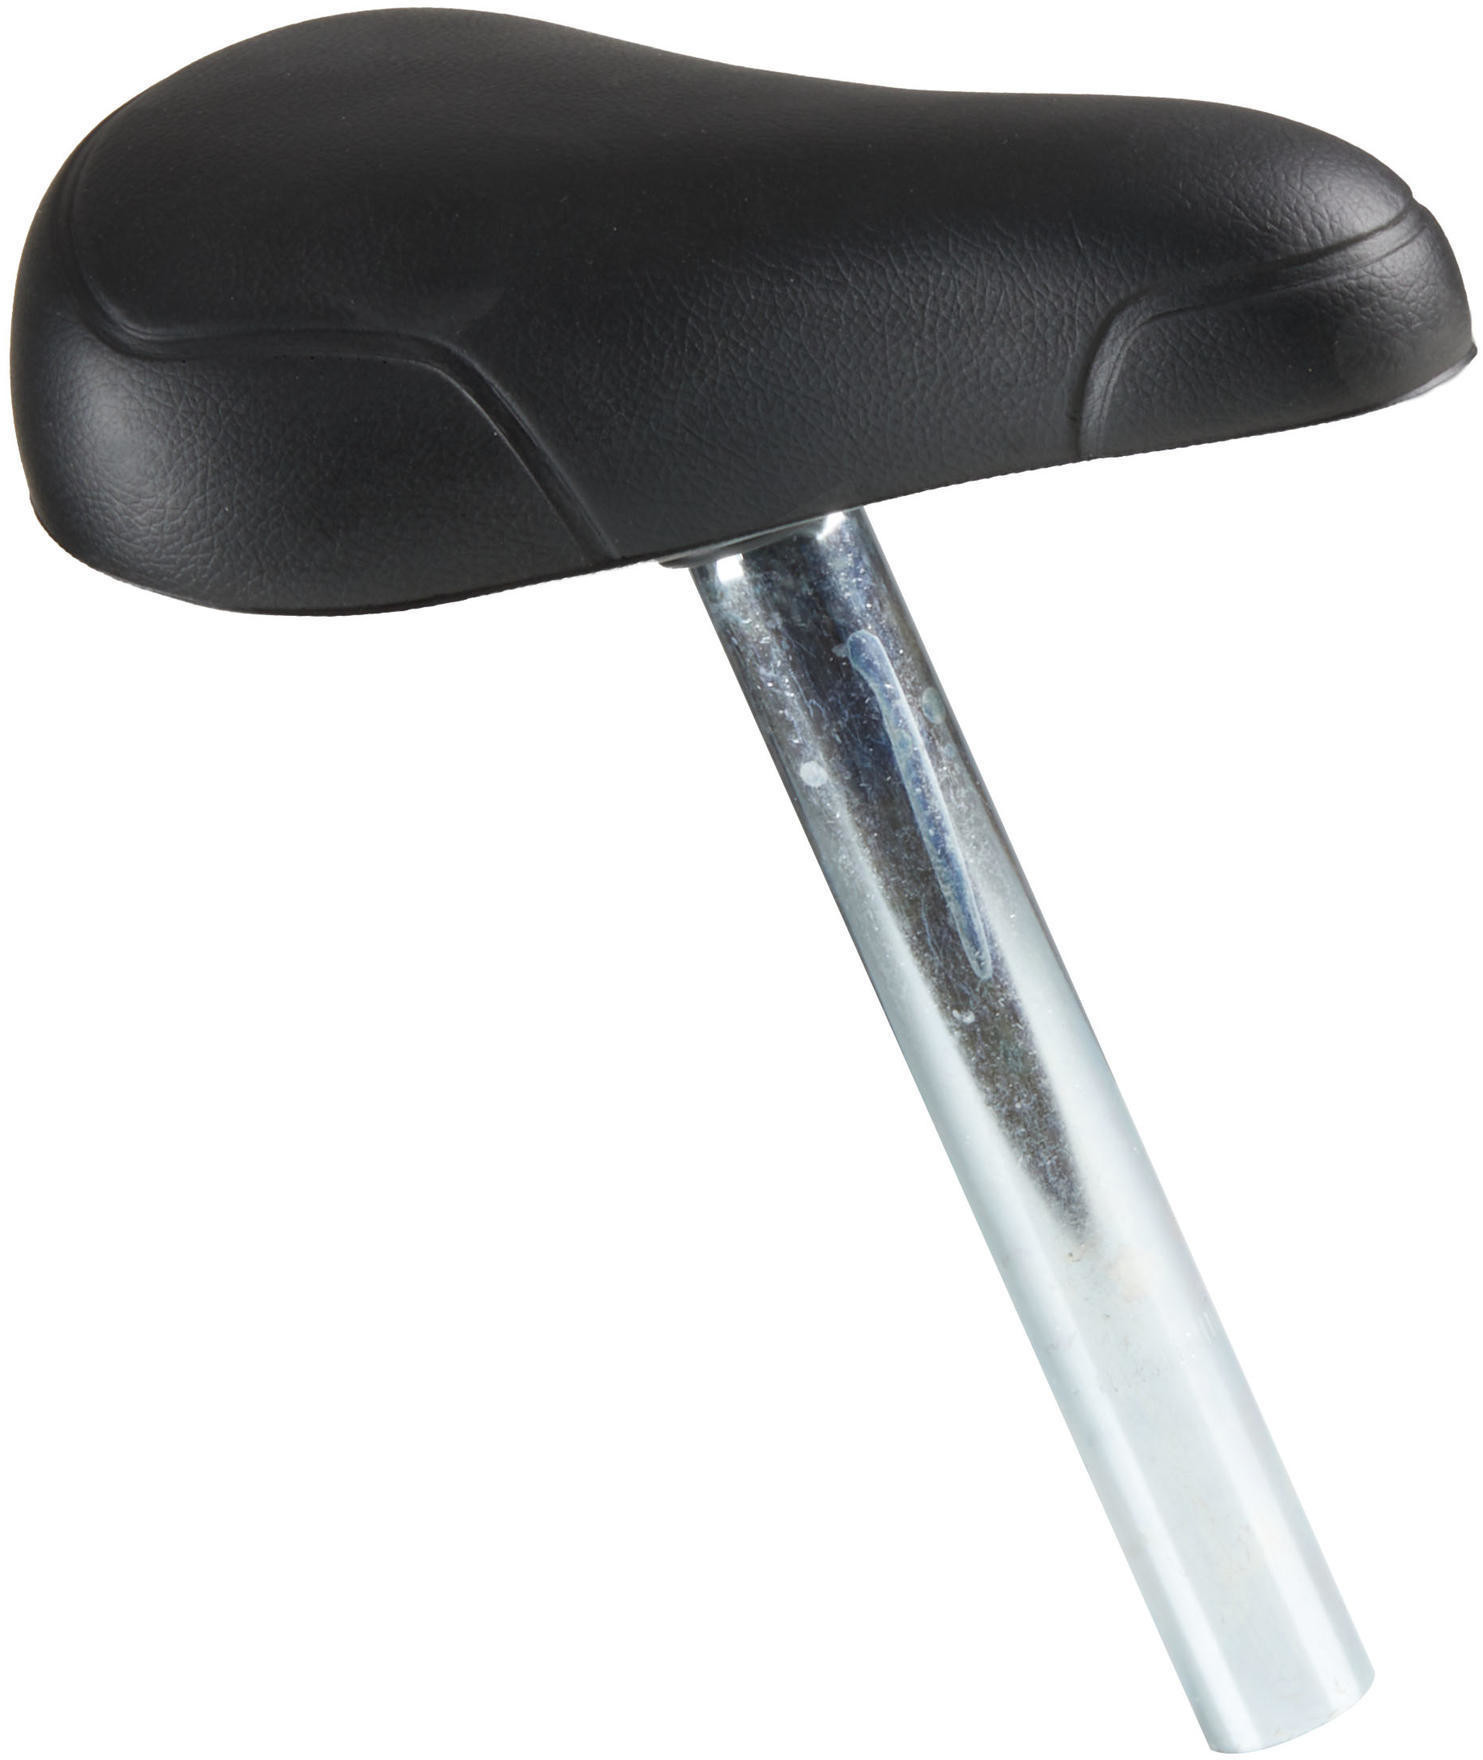 Selle Royal BTWIN do 16